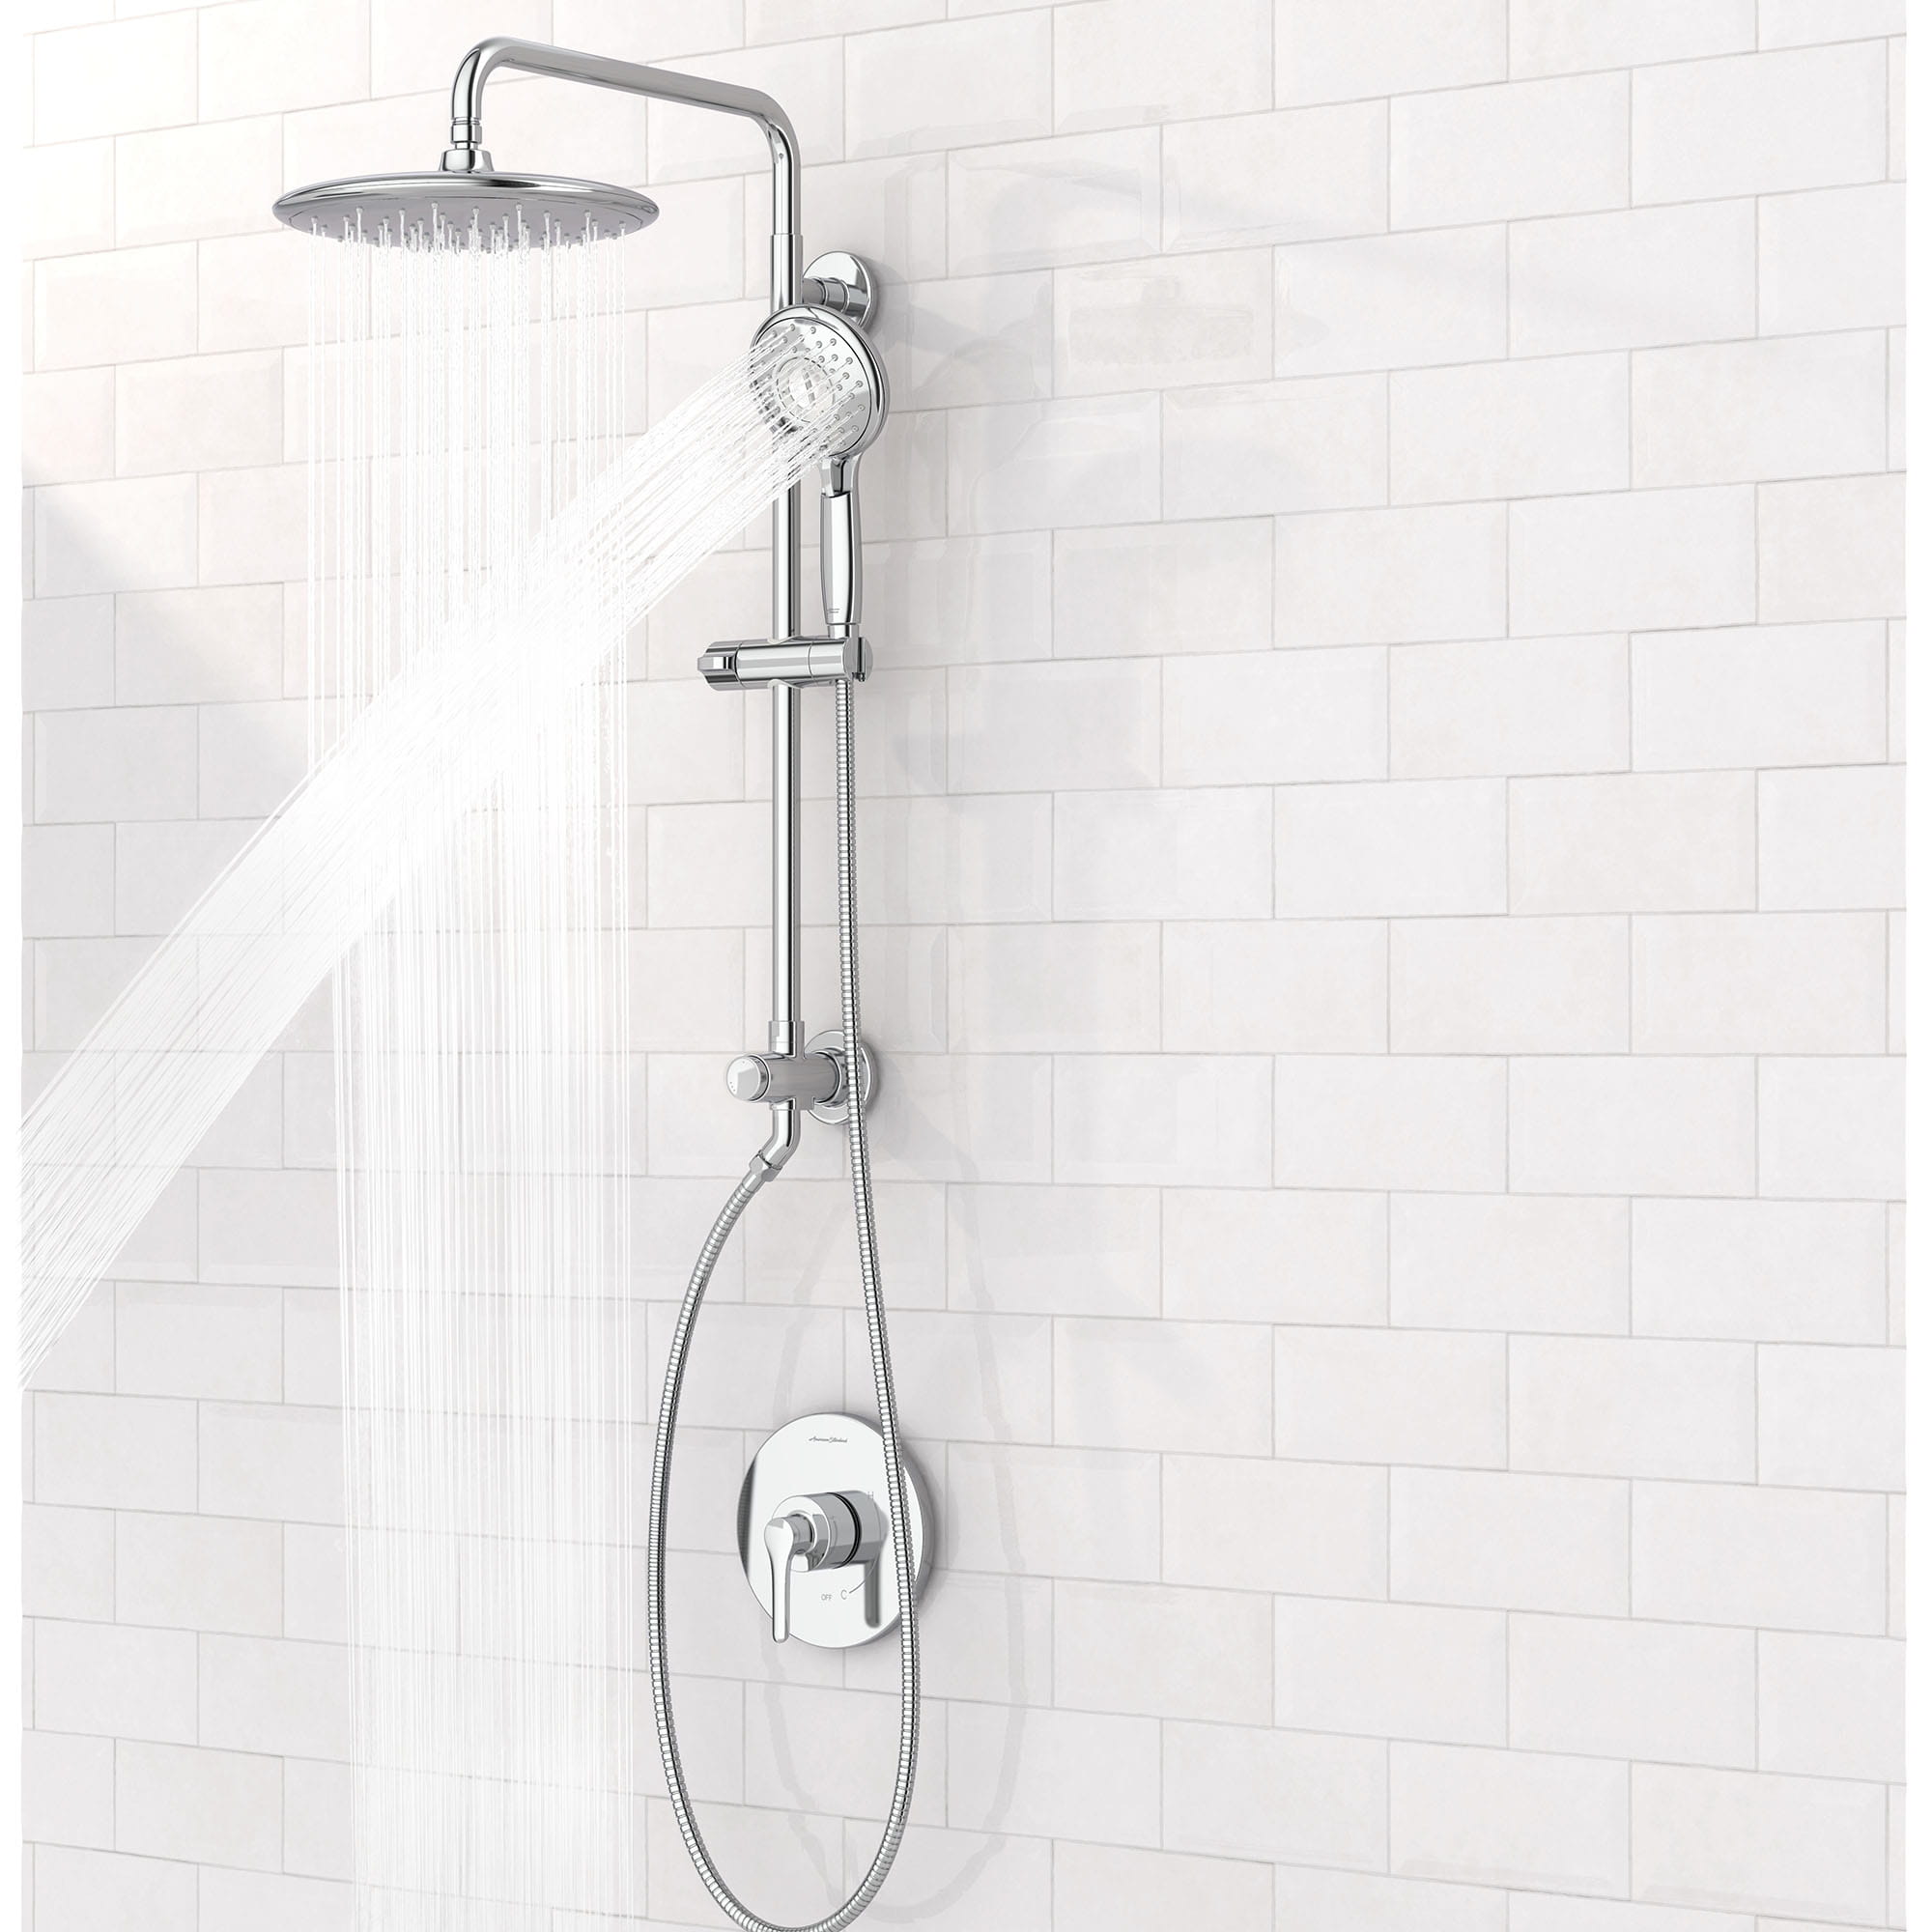 Spectra Versa 24 Inch 4 Function 25 gpm 95 L min Shower System With Rain Showerhead CHROME